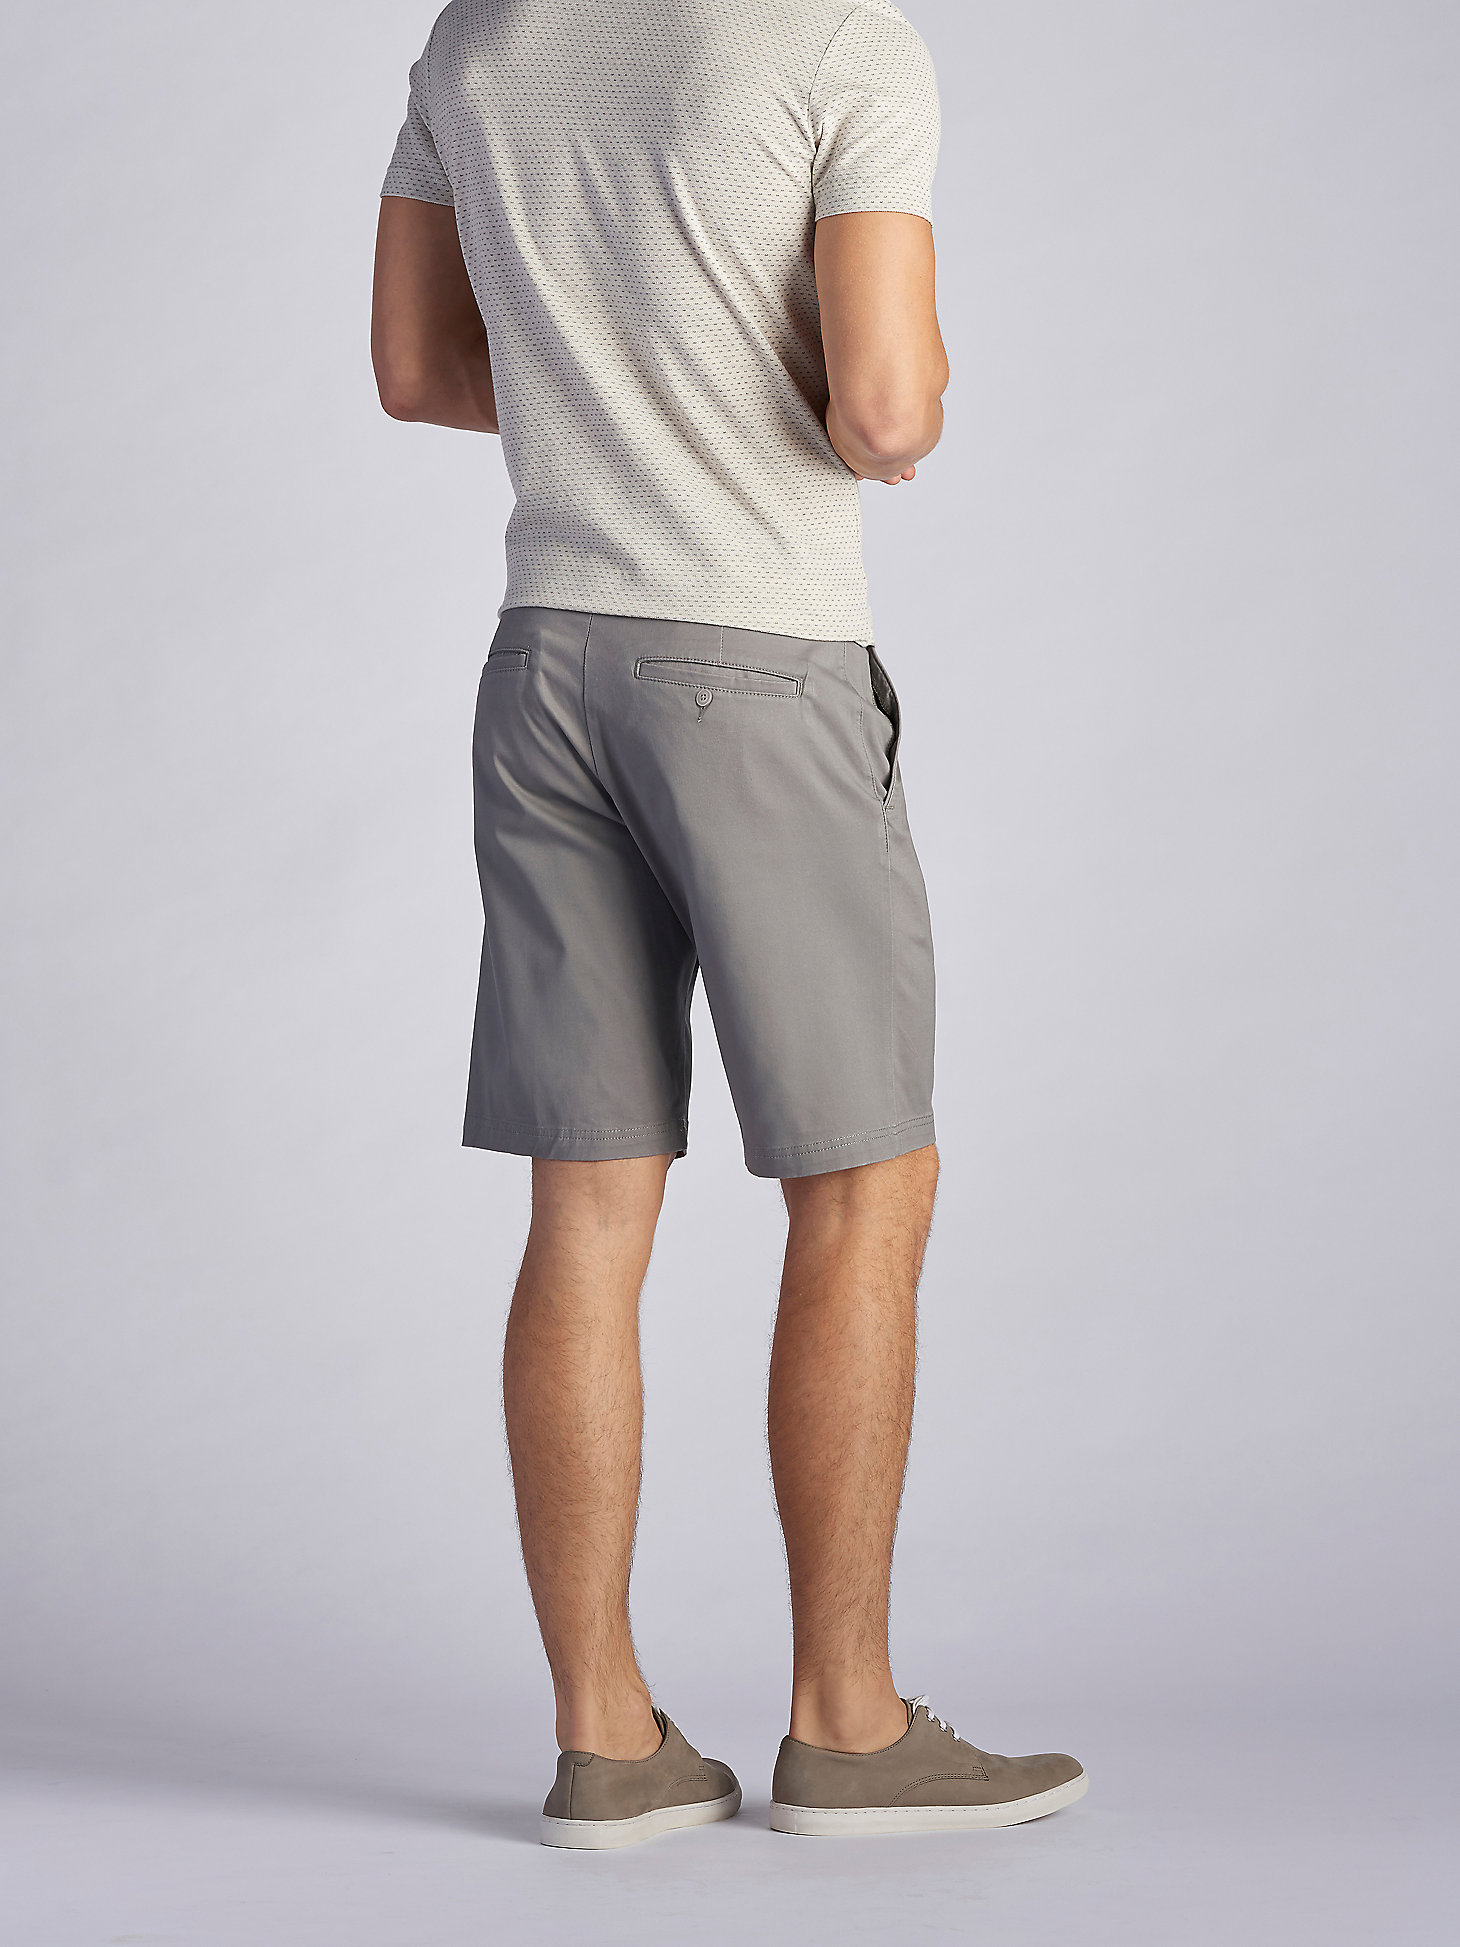 Men's Extreme Motion Short in Iron alternative view 1